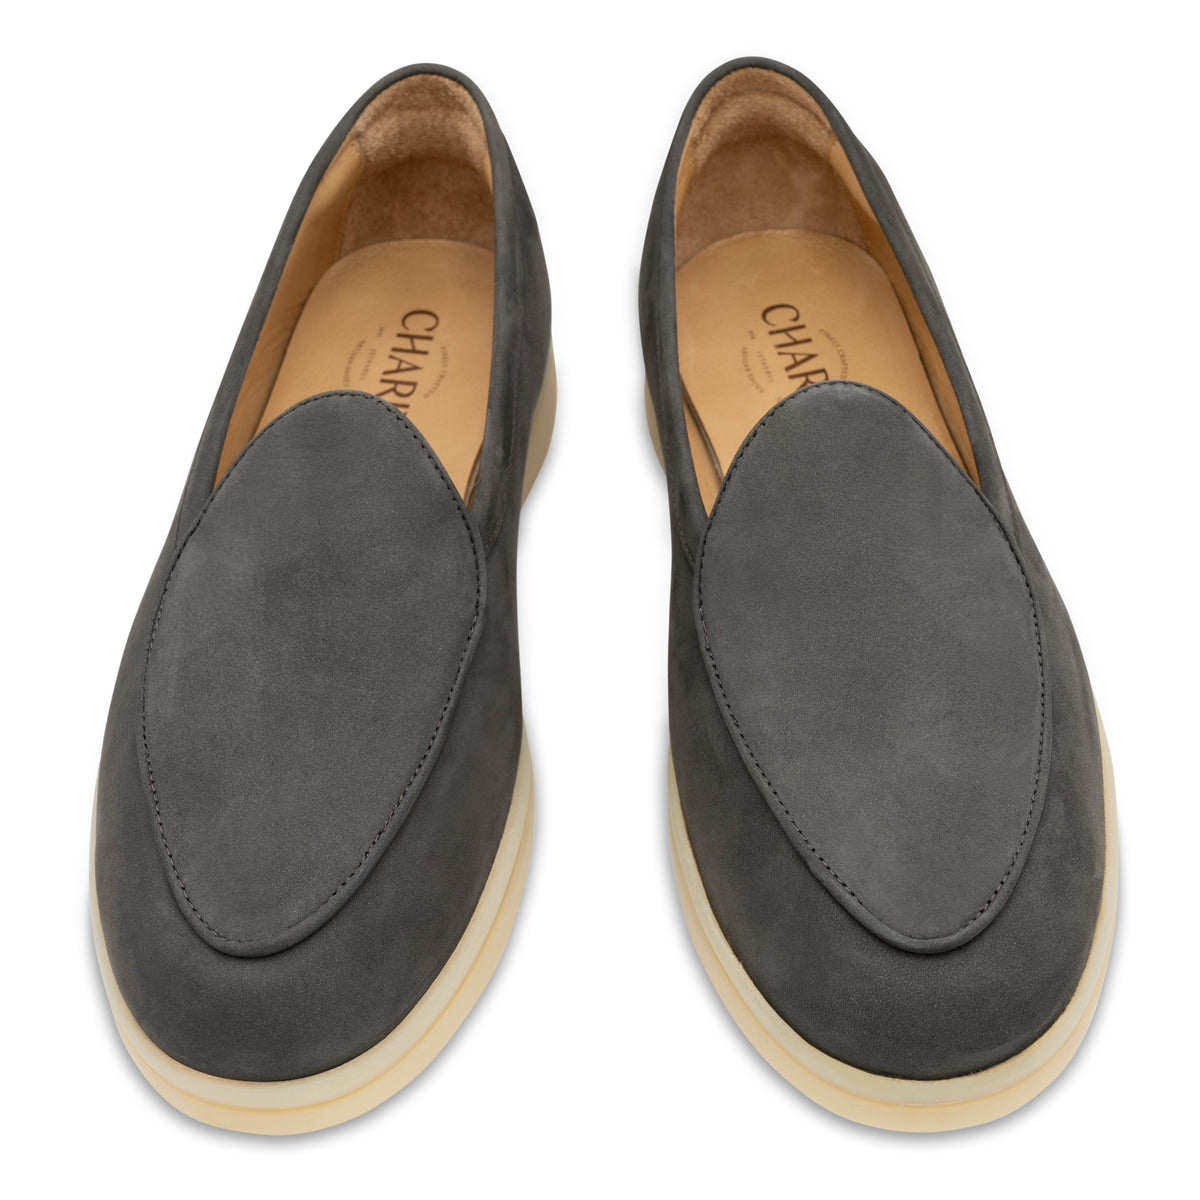 Graphite Loafers - Charix Shoes